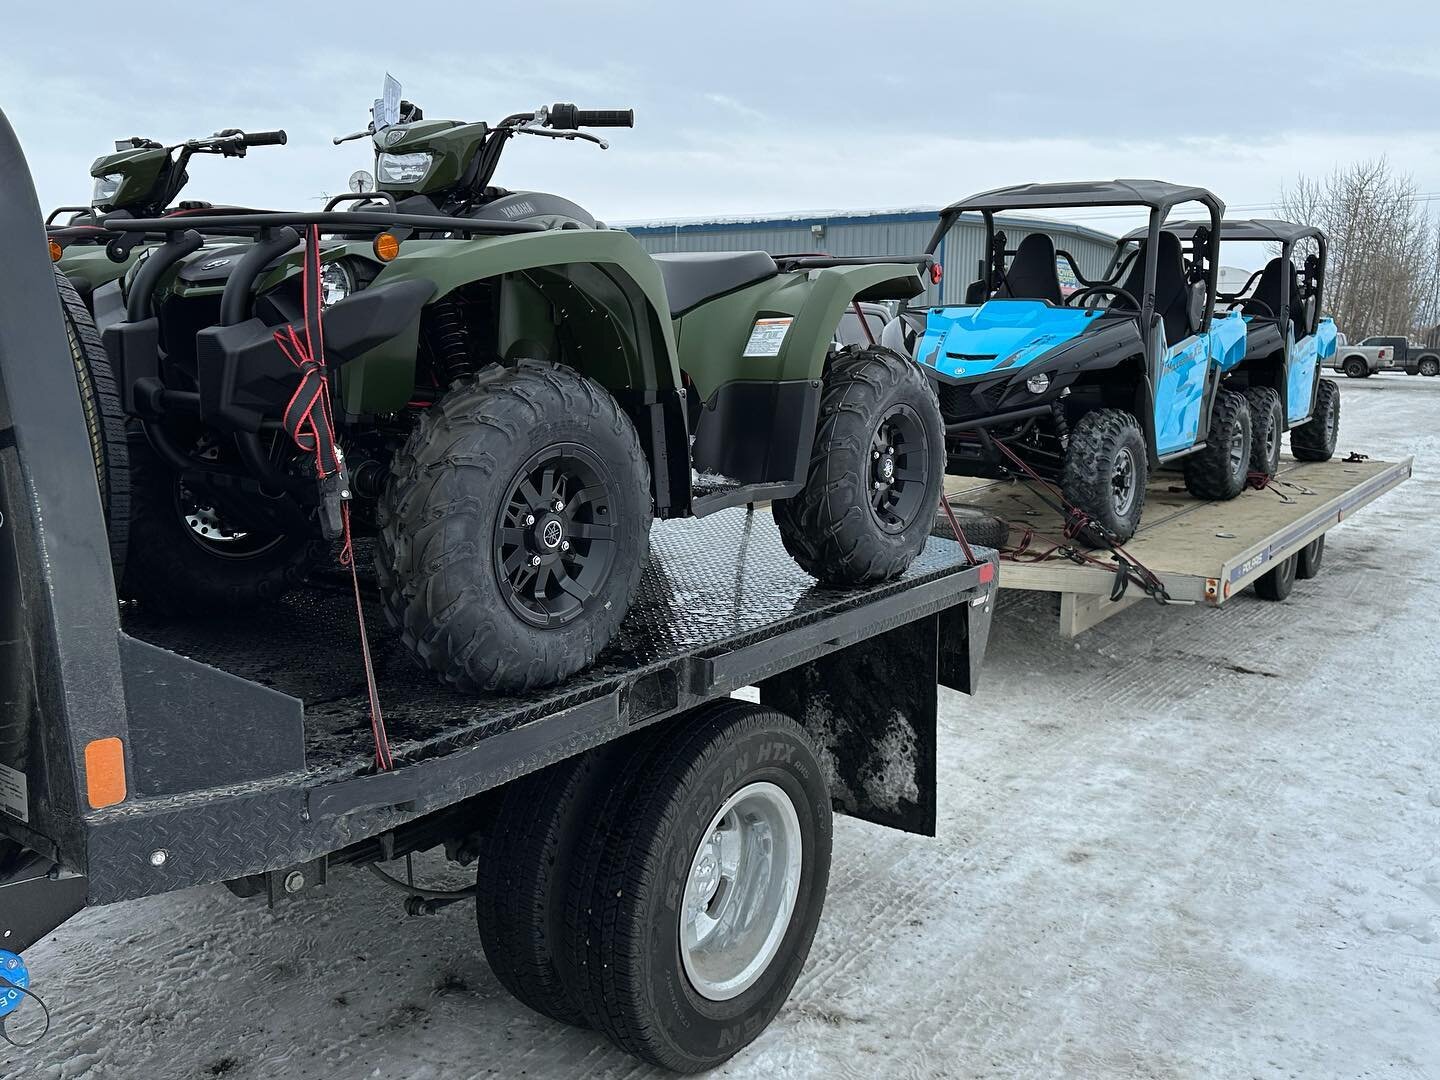 Our brand new 2023 ATV and Side by Side fleet is starting to arrive! Look at that Yamaha Wolverine color! 😍